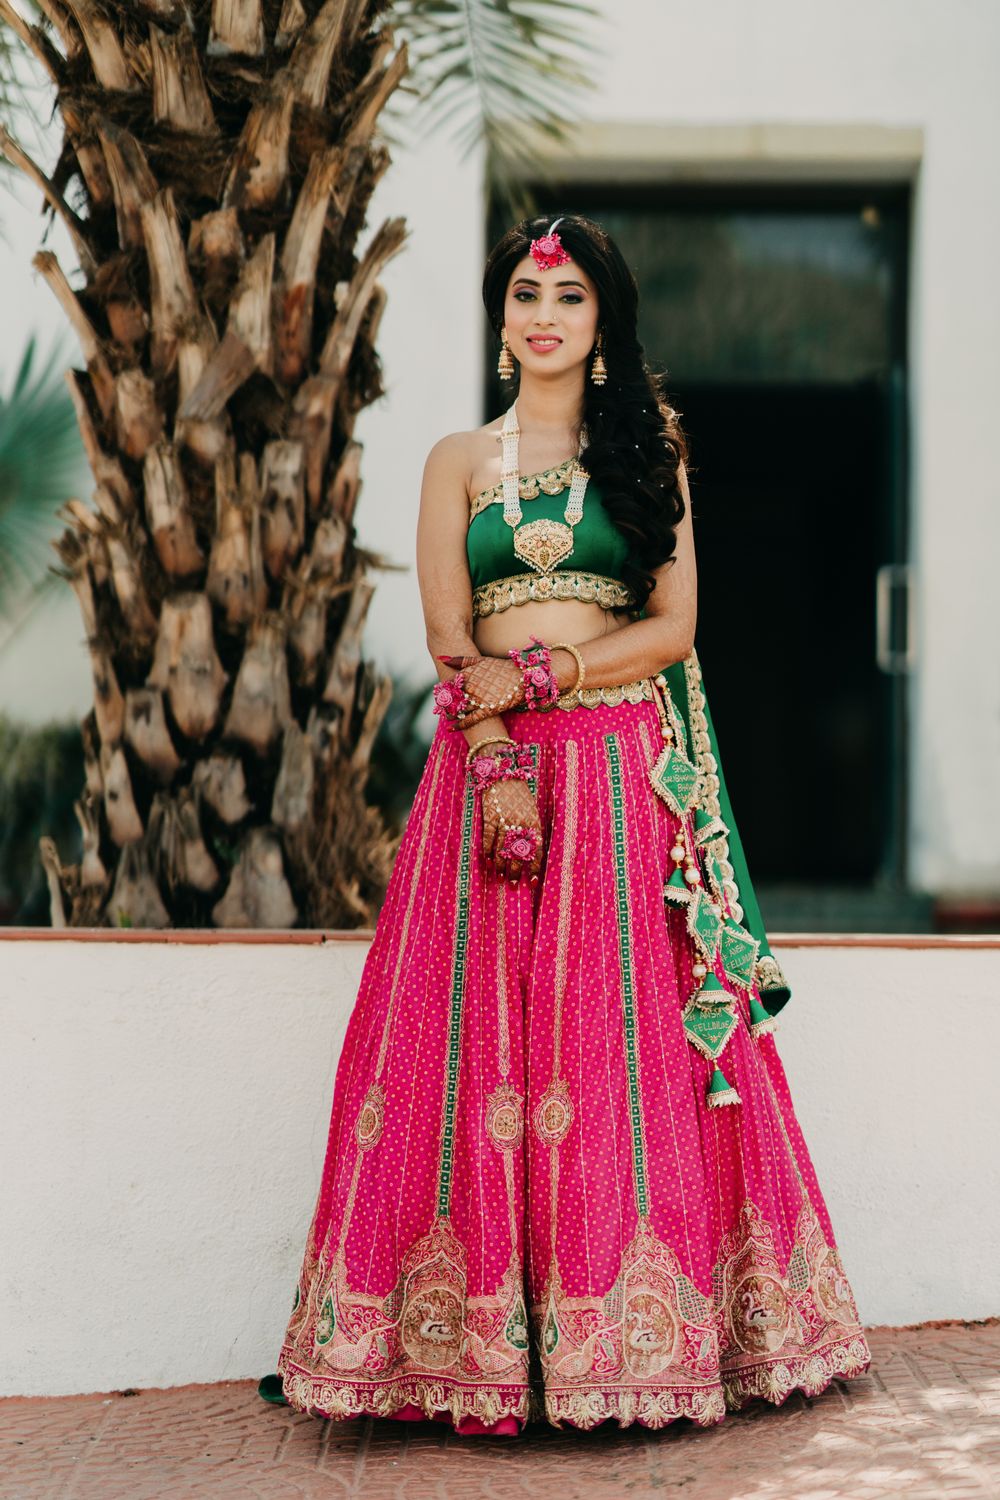 Photo of Bride wearing a green one-shoulder blouse with a pink lehenga.